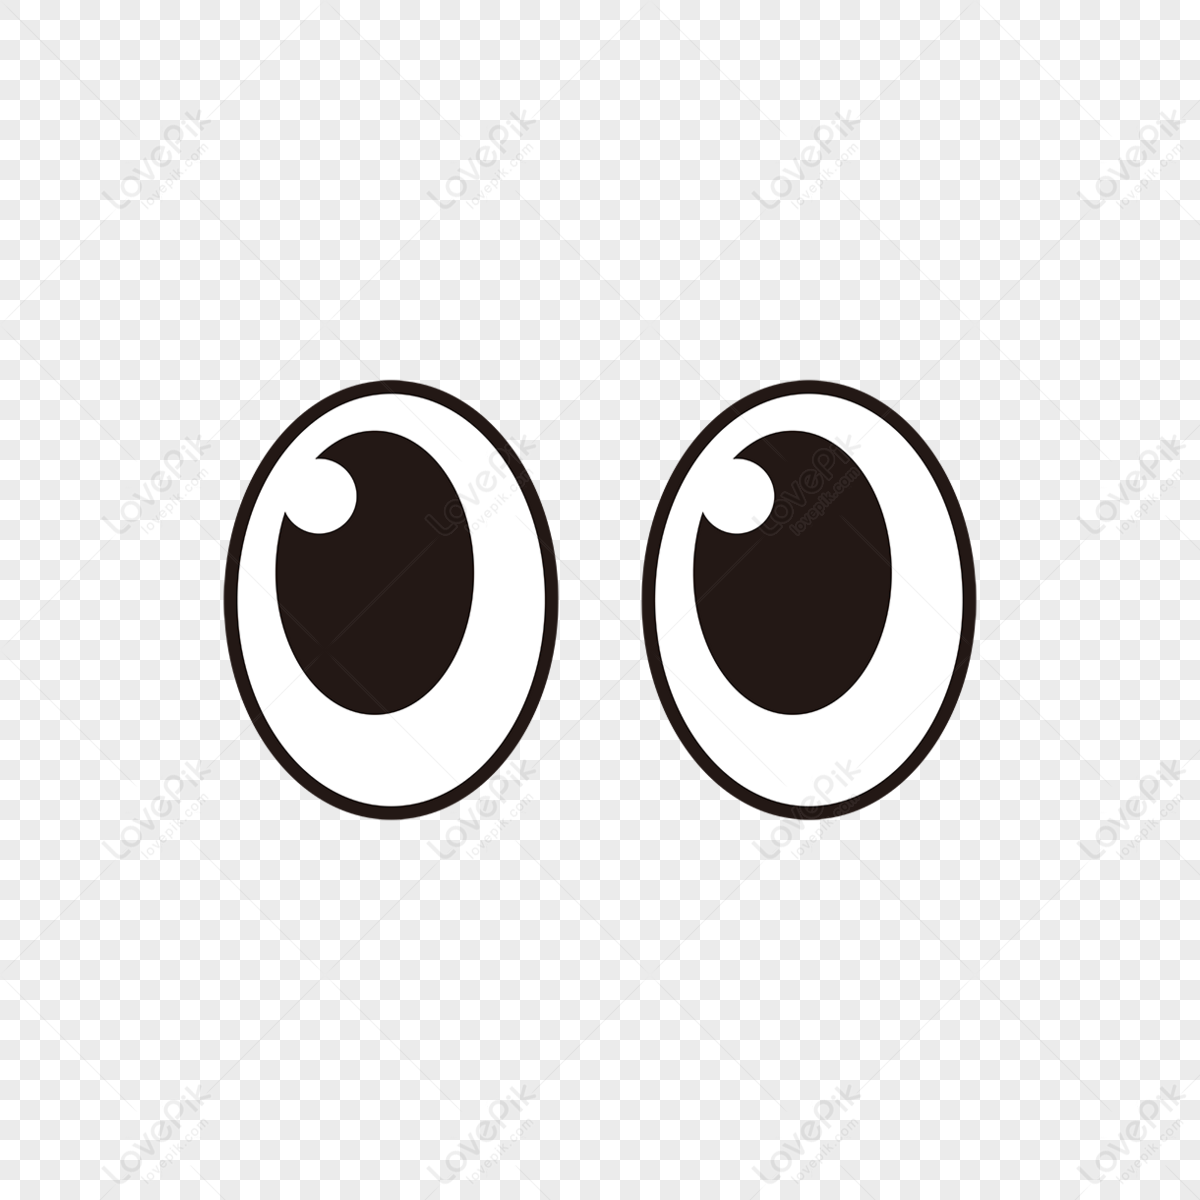 Simple black vector cartoon big eyes material eyes clipart anime eyes png white transparent